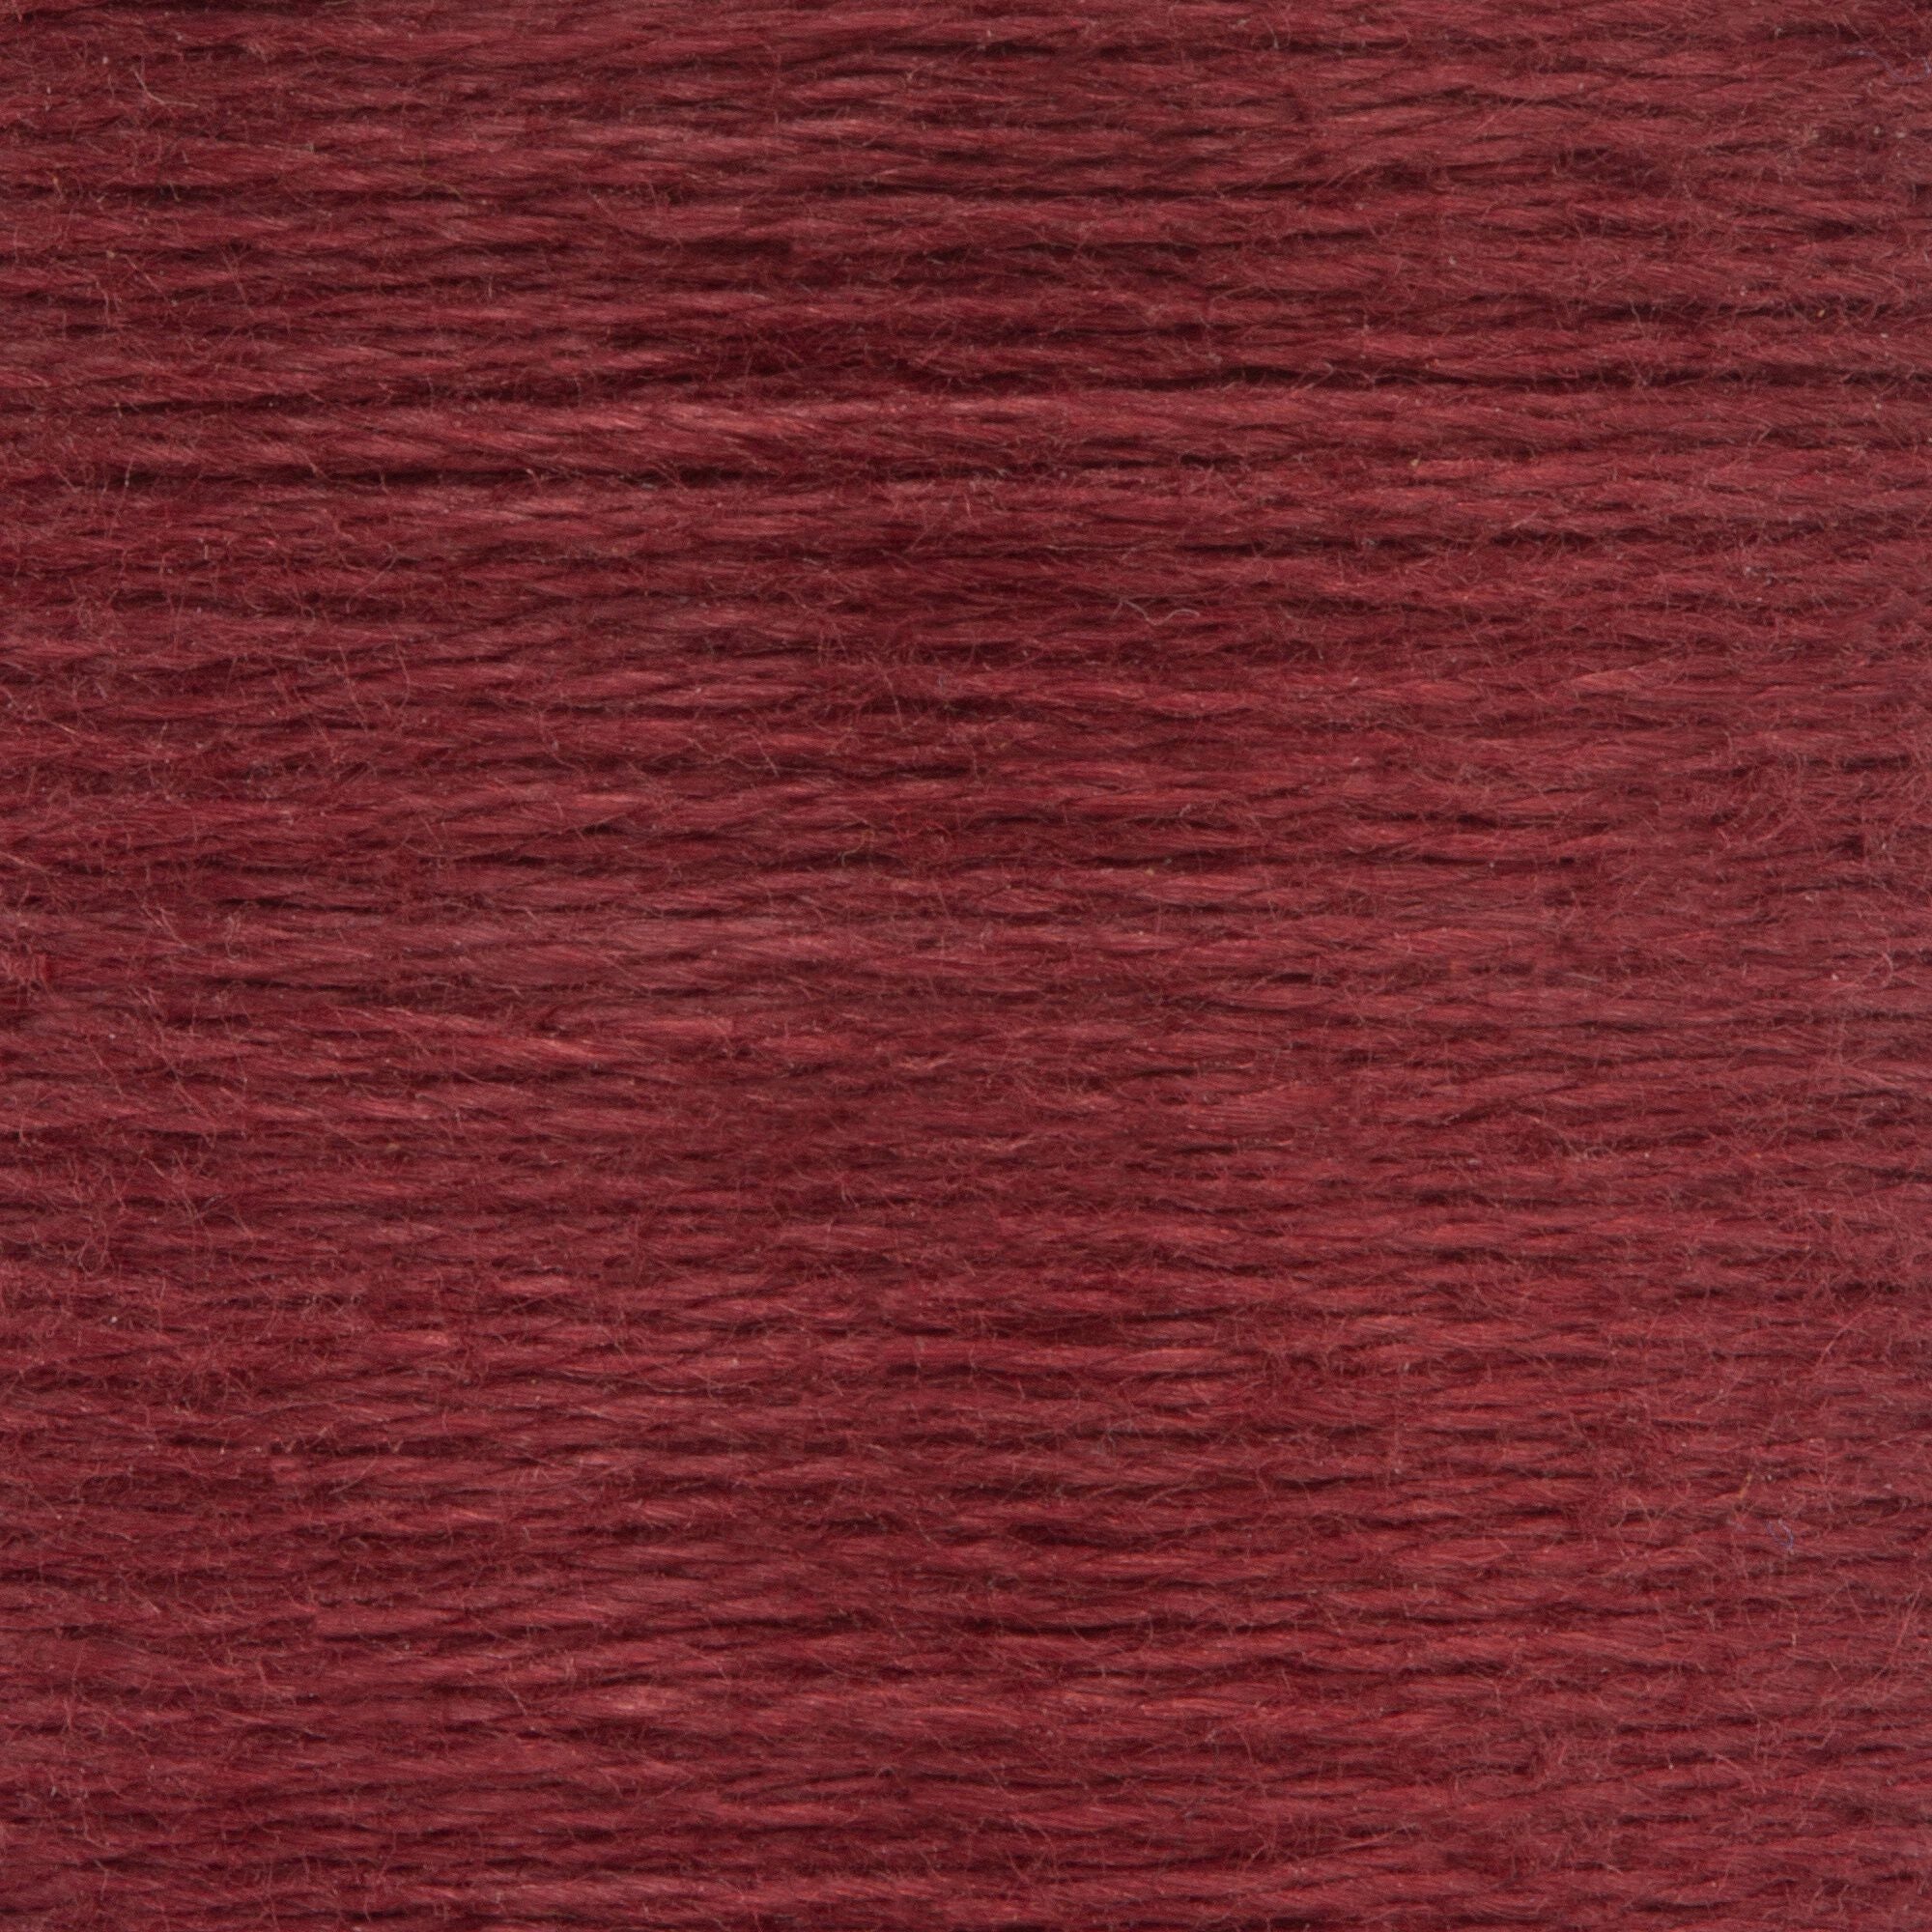 Anchor Embroidery Floss in Rose Wine Vy Dk